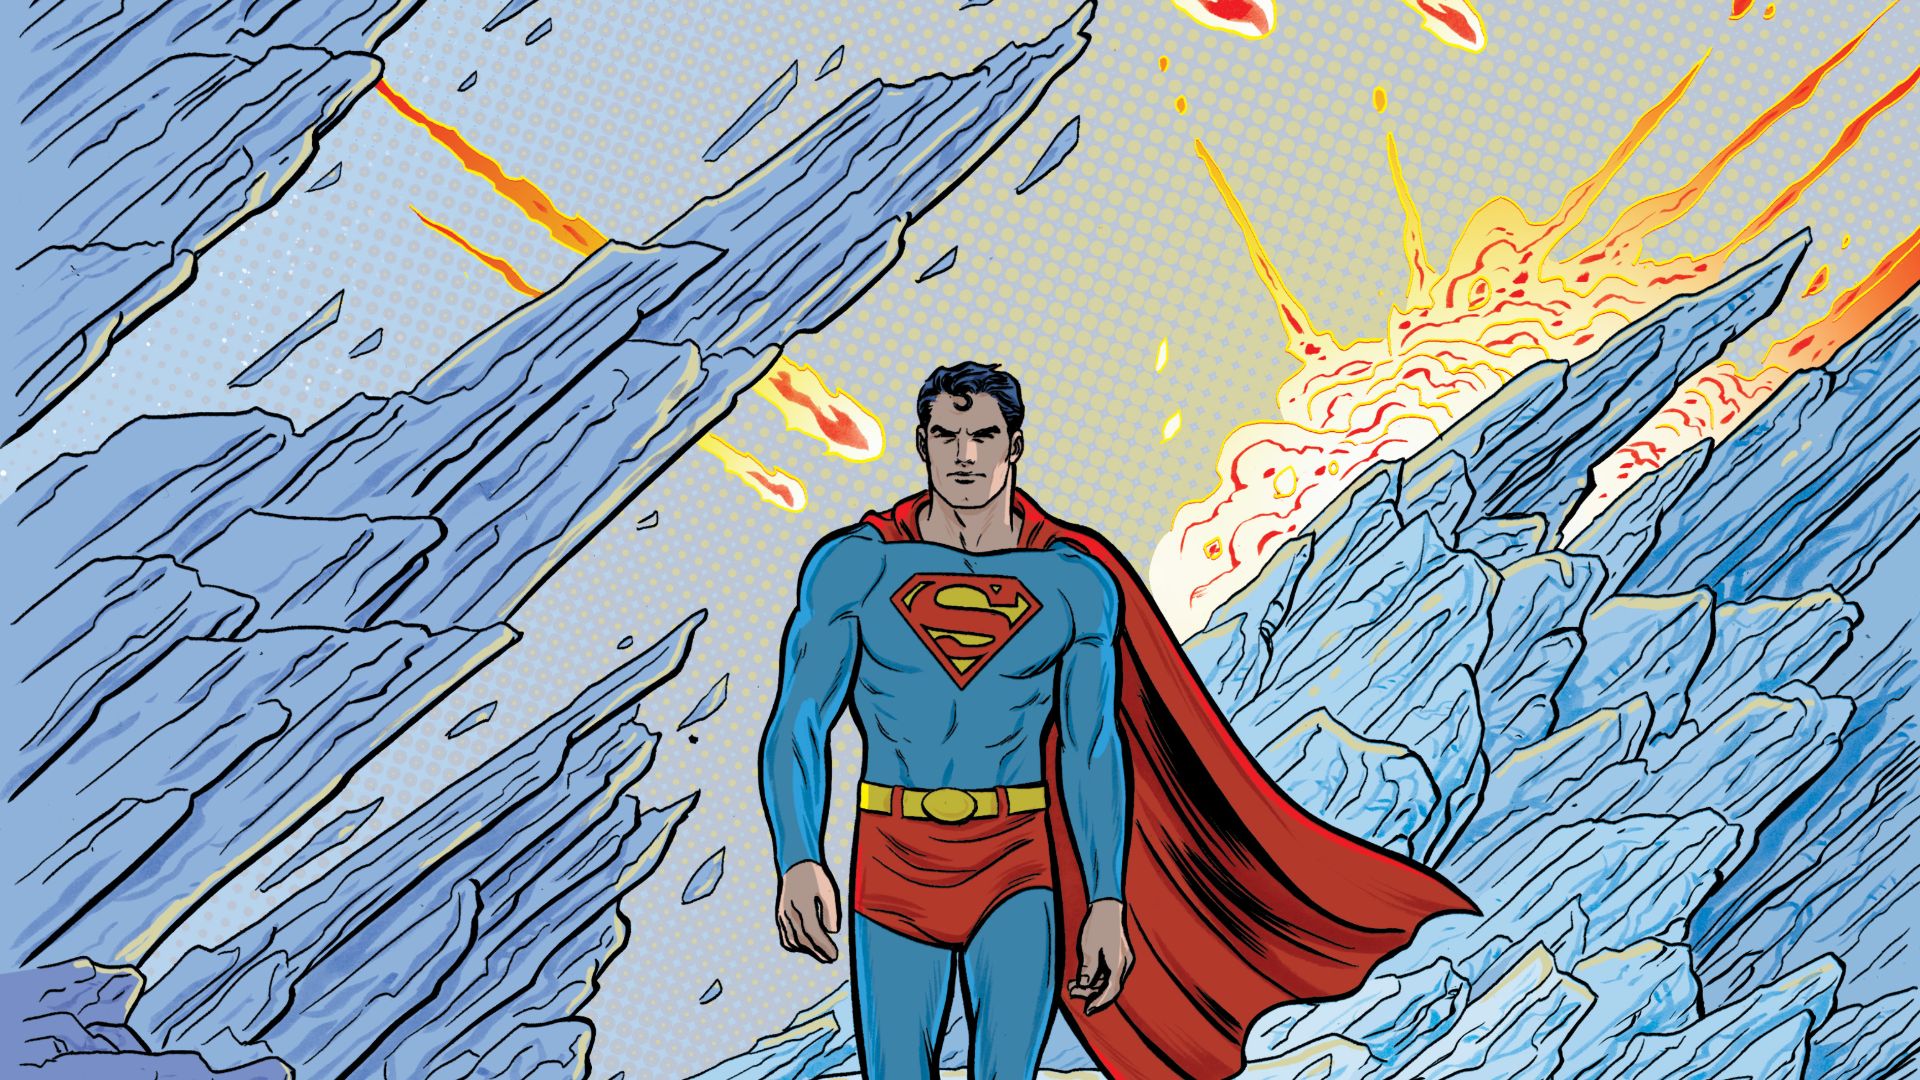 Superman - Space Age tells the Man of Steel's life story and revisits Crisis on Infinite Earths | GamesRadar+